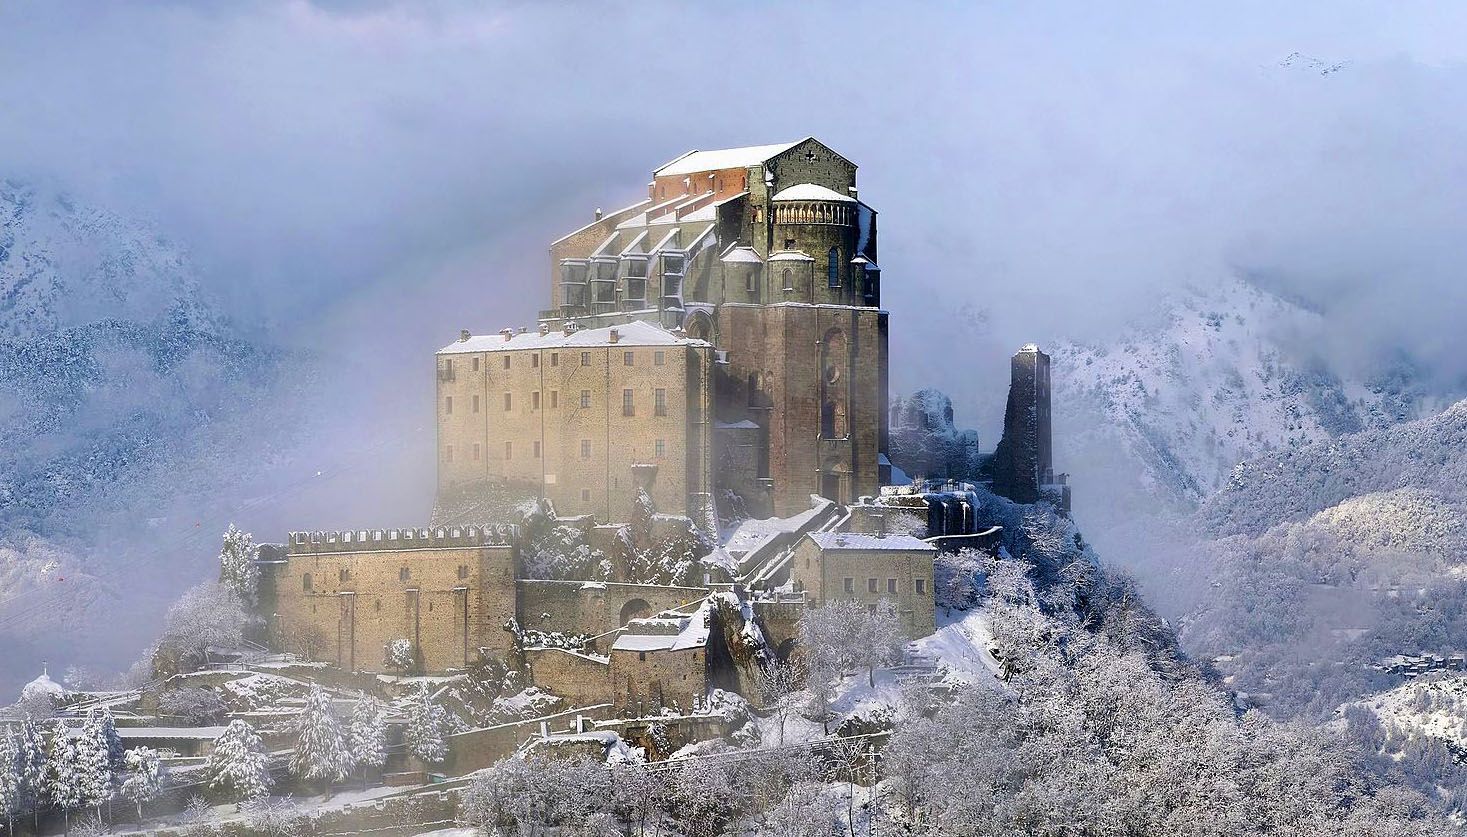 The Sacra di San Michele, is a religious complex on Mount Pirchiriano, situated on the south side of the Val di Susa overlooking the villages of Avigliana and Chiusa di San Michele. The abbey, which for much of its history came under Benedictine rule, is now entrusted to the Rosminians.